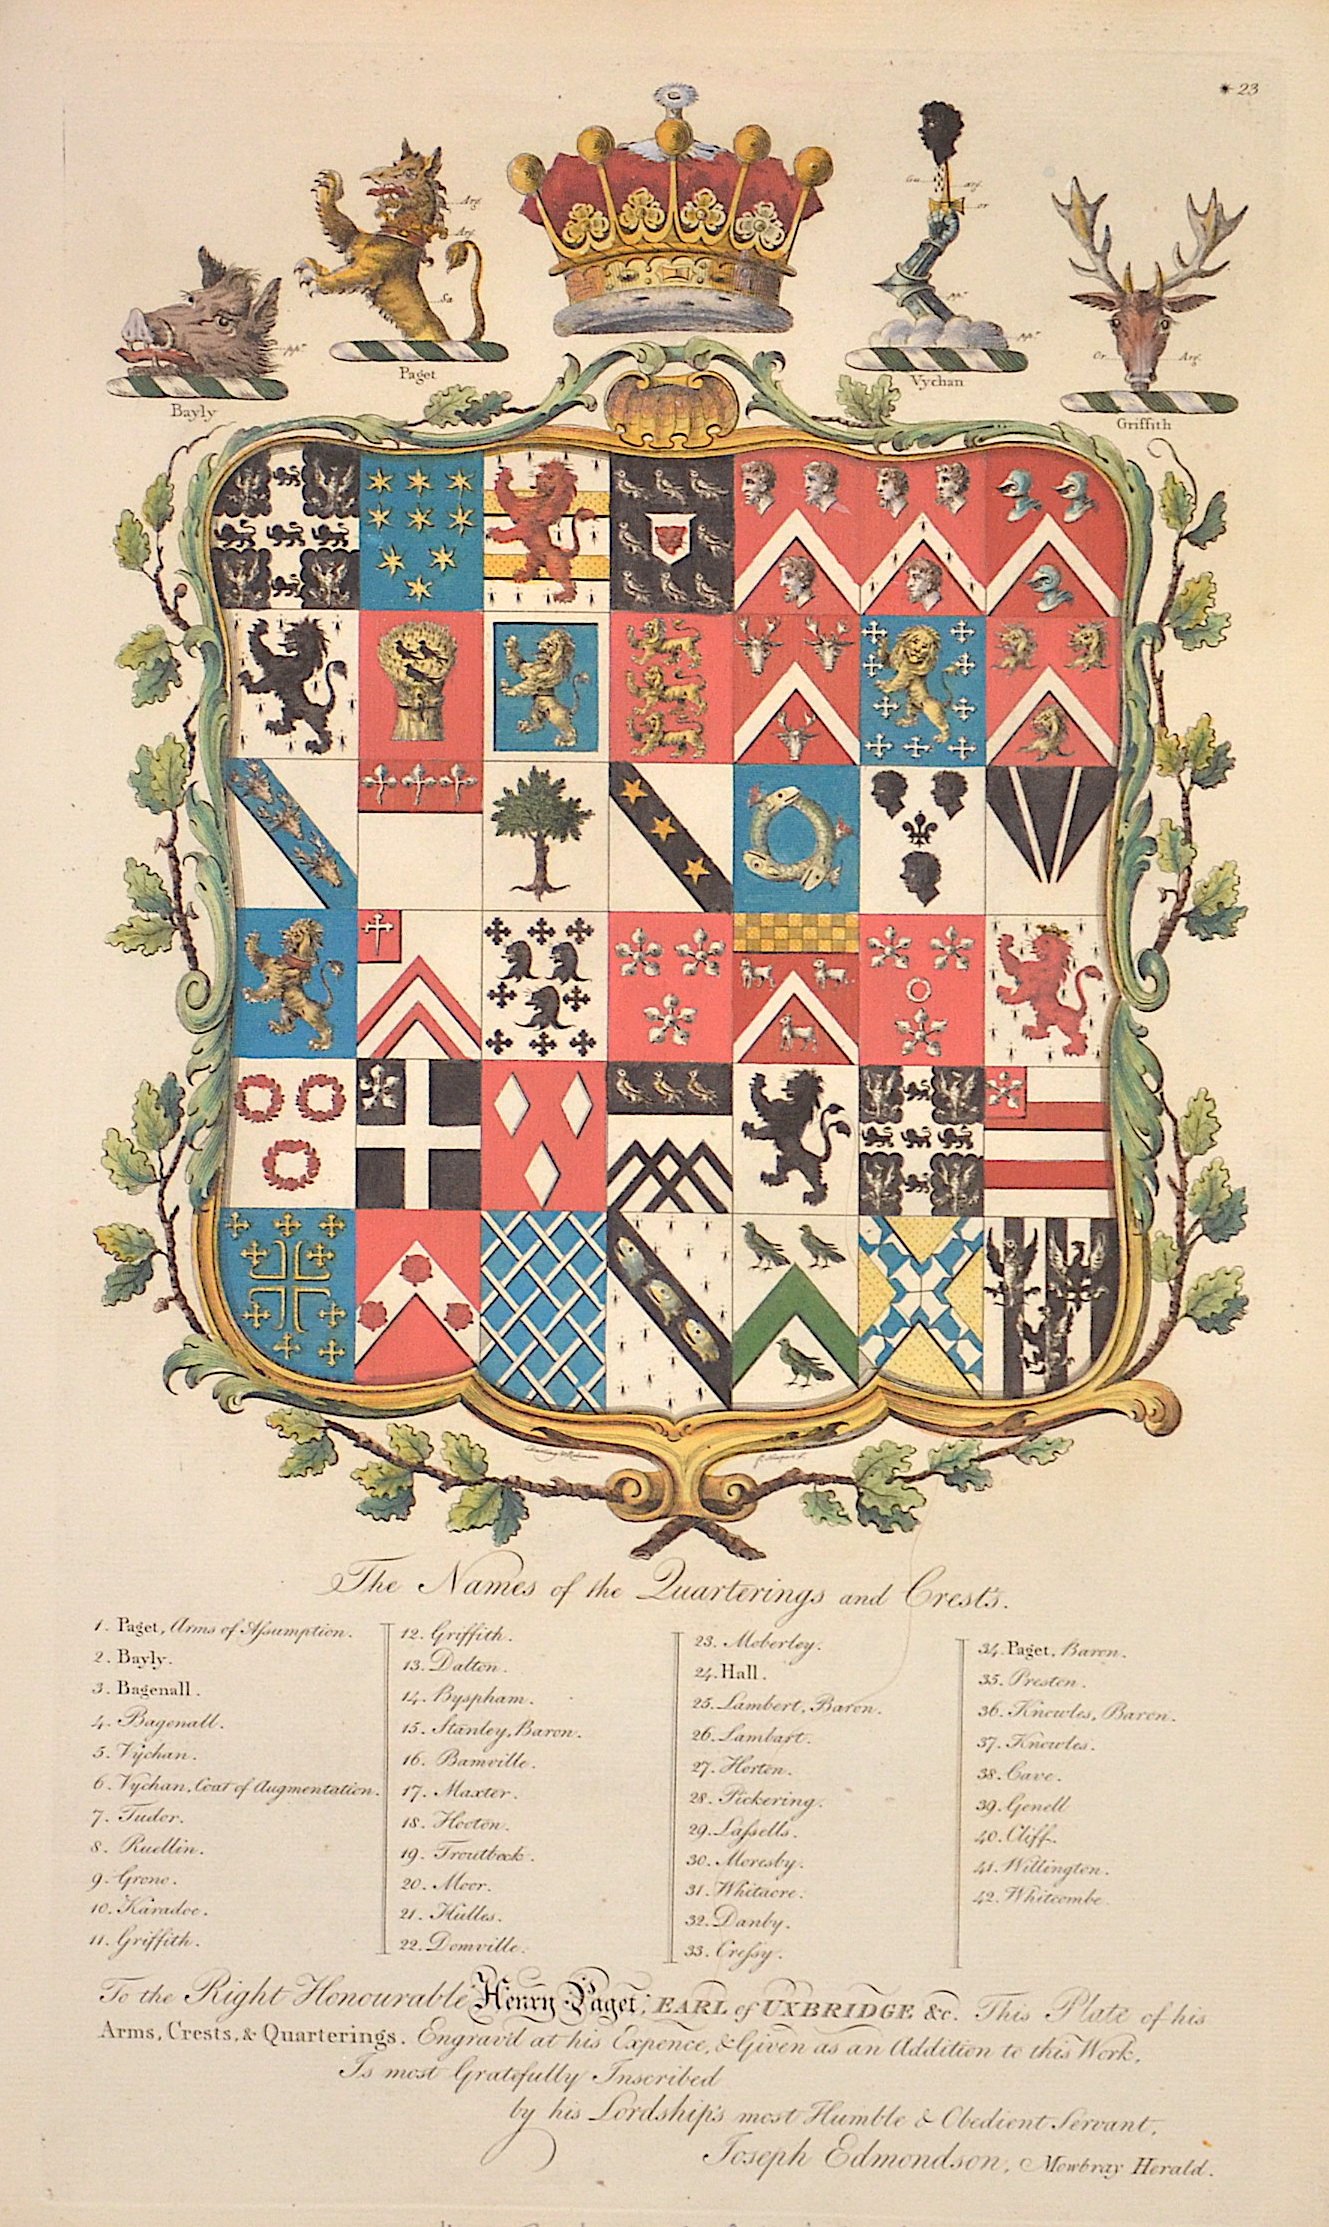 Edmondson Joseph The Names of the Quarterings and Crest’s. / To the Right Honourable Henry Paget, Earl of Uxbridge u. c.